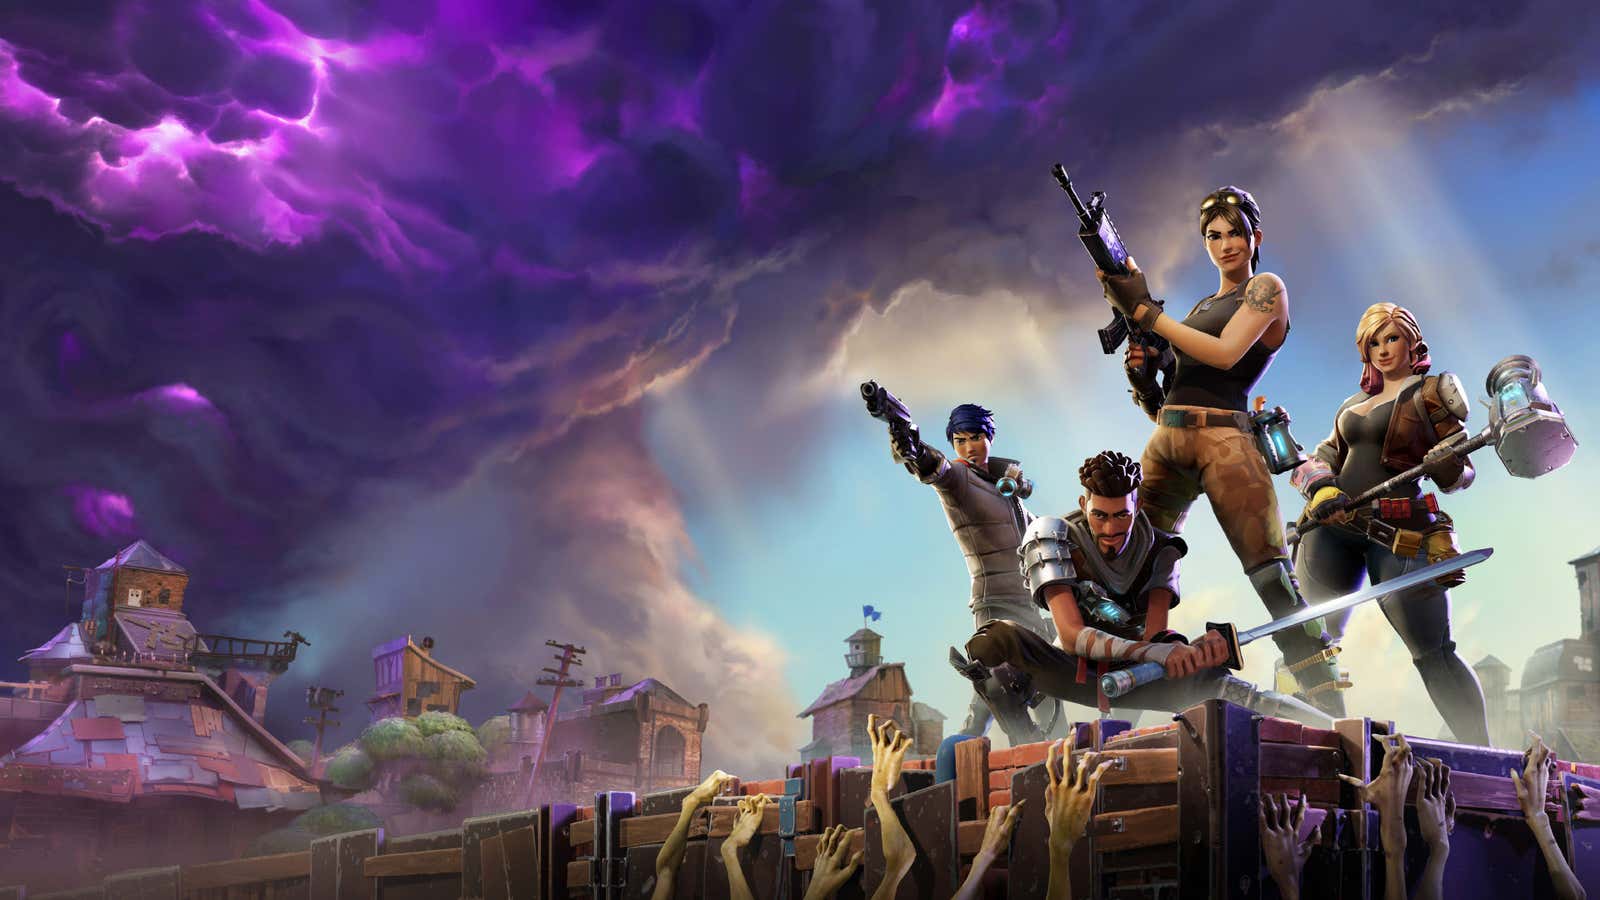 Epic’s Fortnite is at the heart of its suit against Apple.